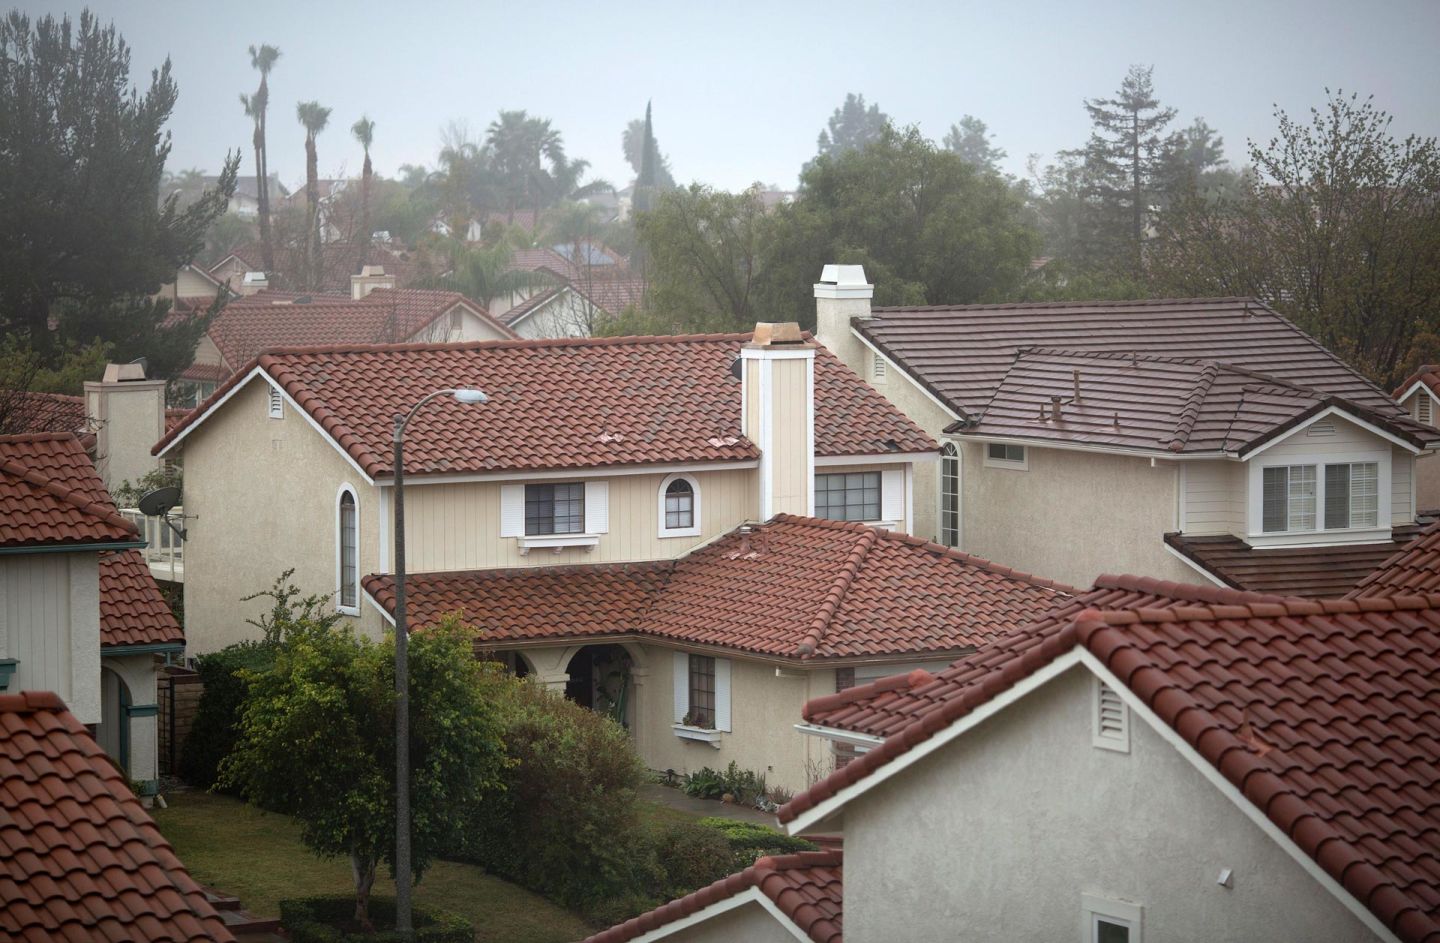 Many people in this Porter Ranch neighborhood have left their homes due to the massive, ongoing natural gas leak at SoCalGas' nearby Aliso Canyon facility. DAVID MCNEW/AFP/Getty Images